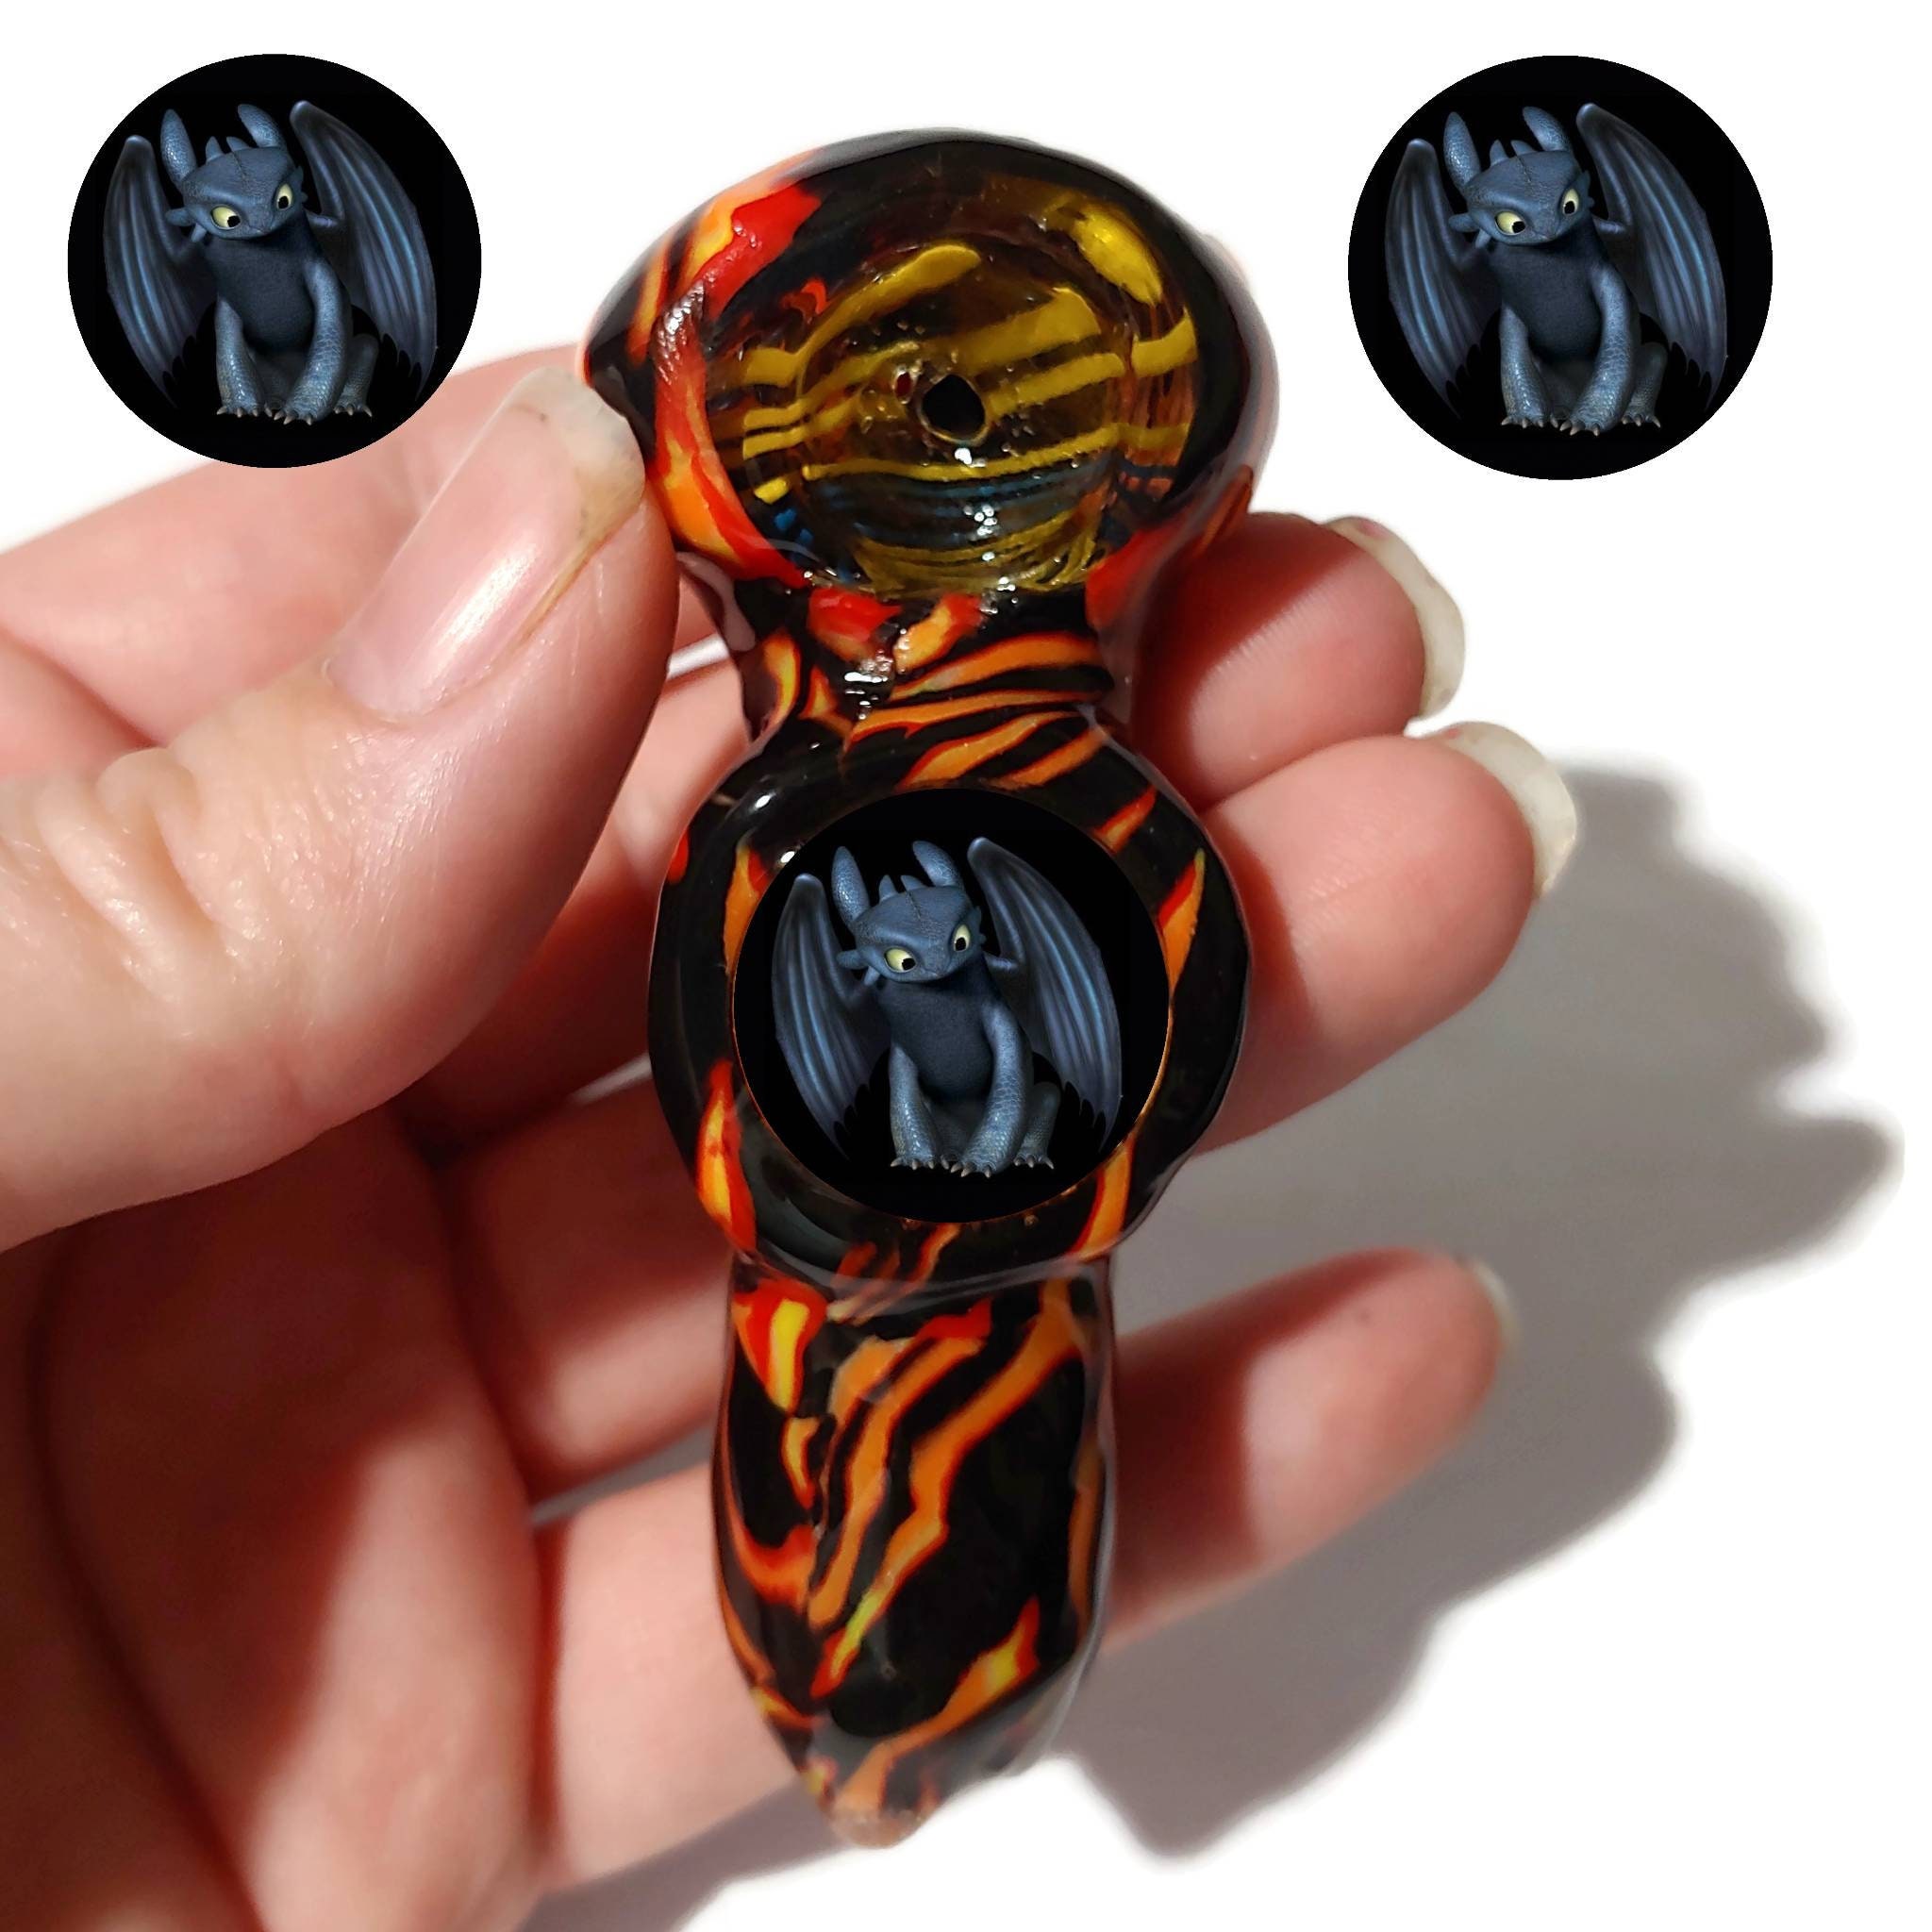 Custom Toothless Dragon Glass Smoking Pipe, Girly Pipes, Unique, Glass  Smoking Bowls, Spoon Pipe, Glow in the Dark Pipe, Glass Art Pipes 